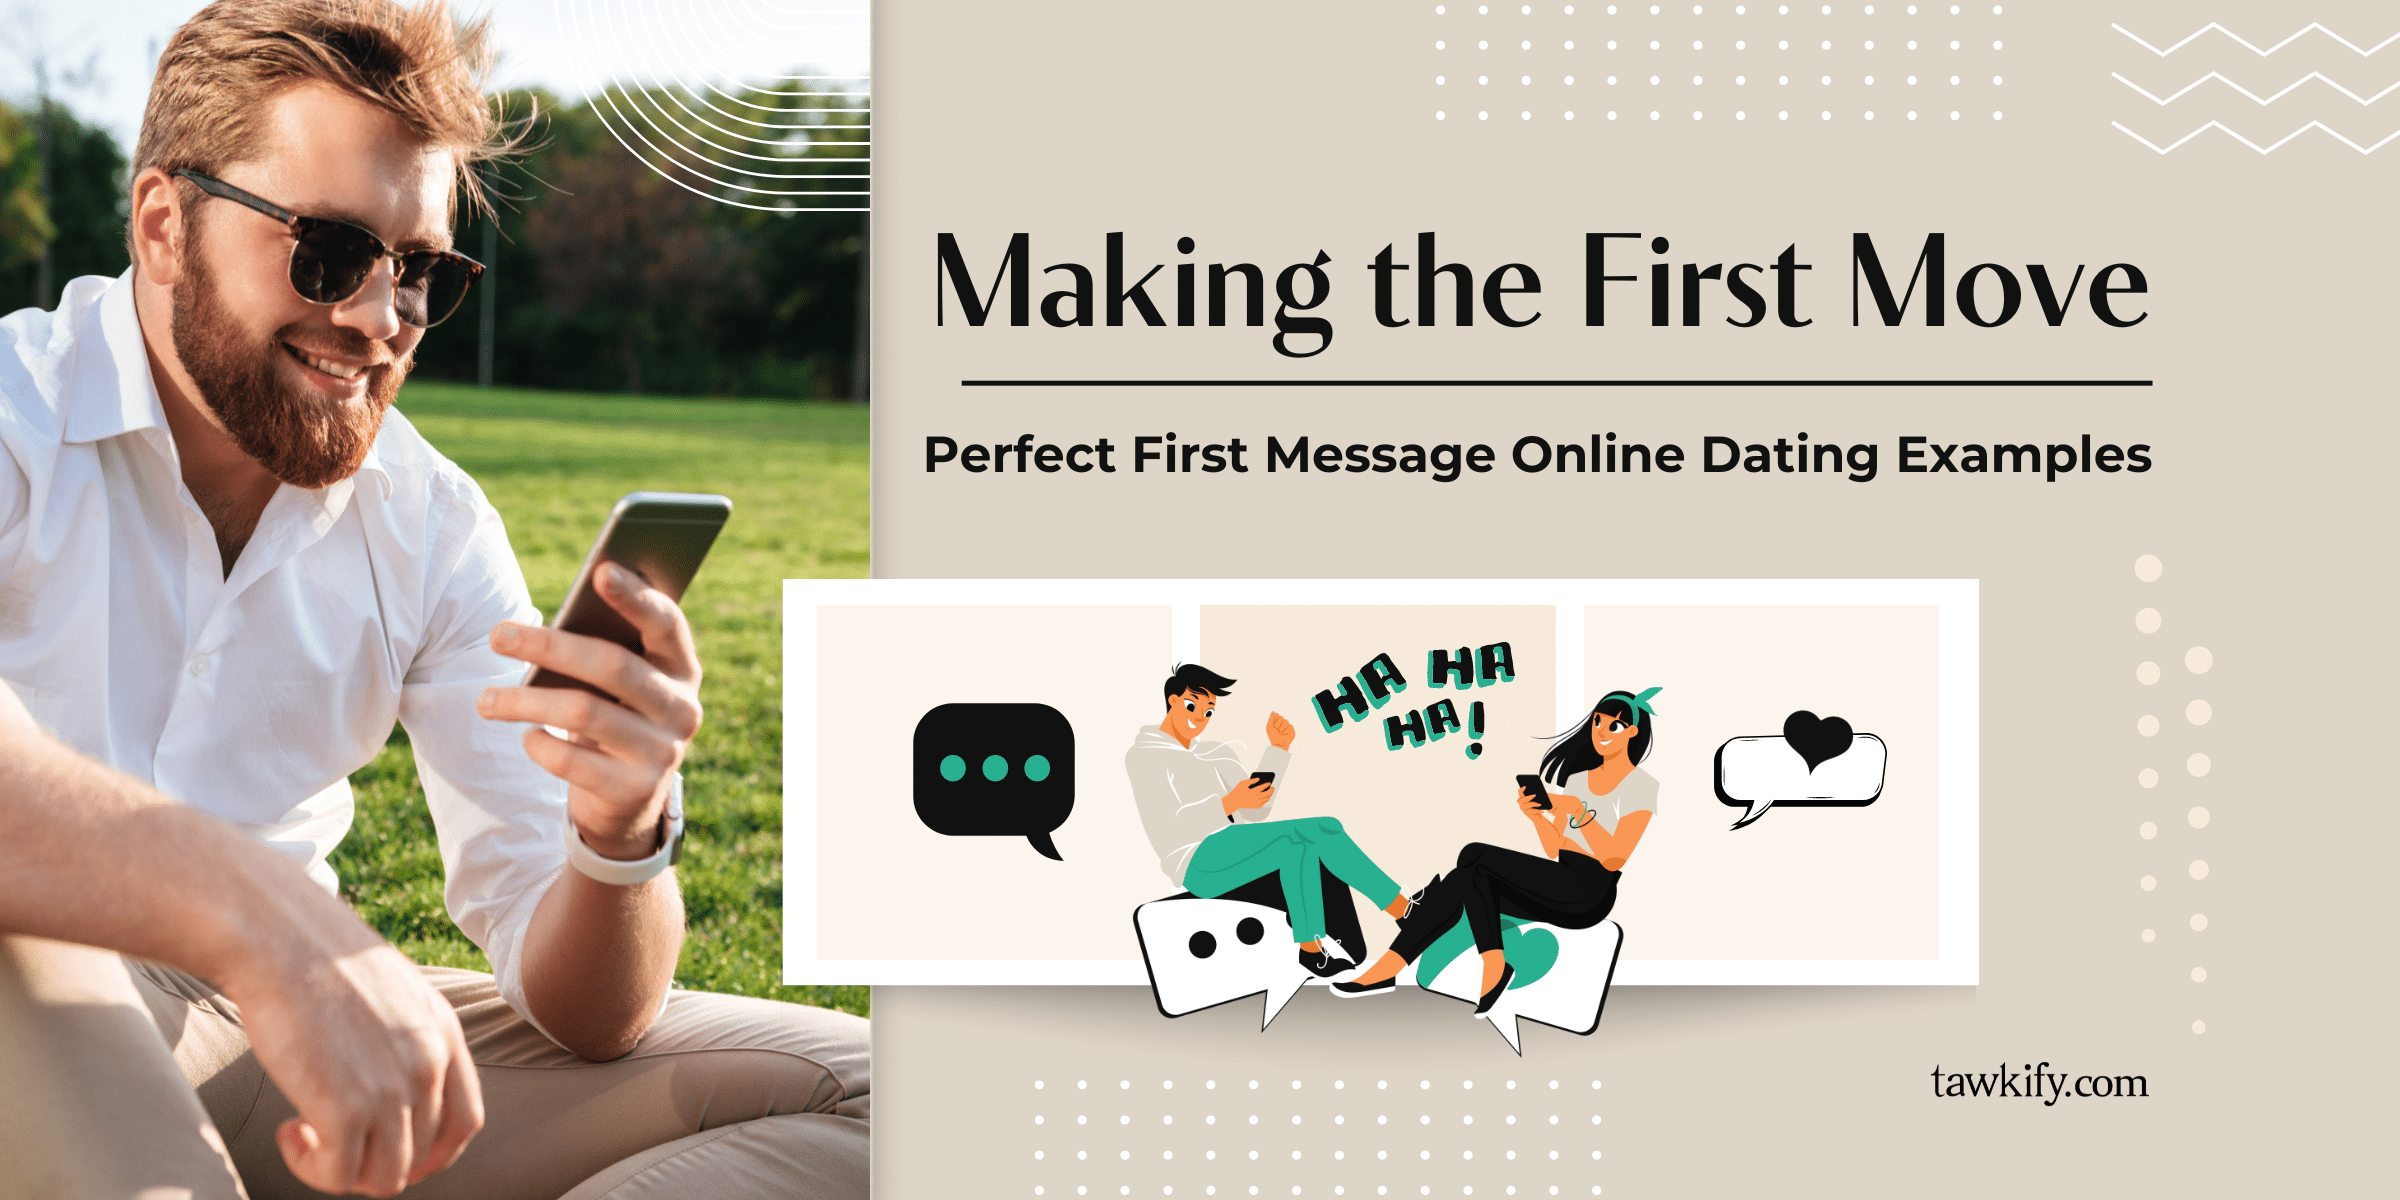 It’s crucial to craft online dating messages that get responses. For help writing your own, check out our perfect first message online dating examples.